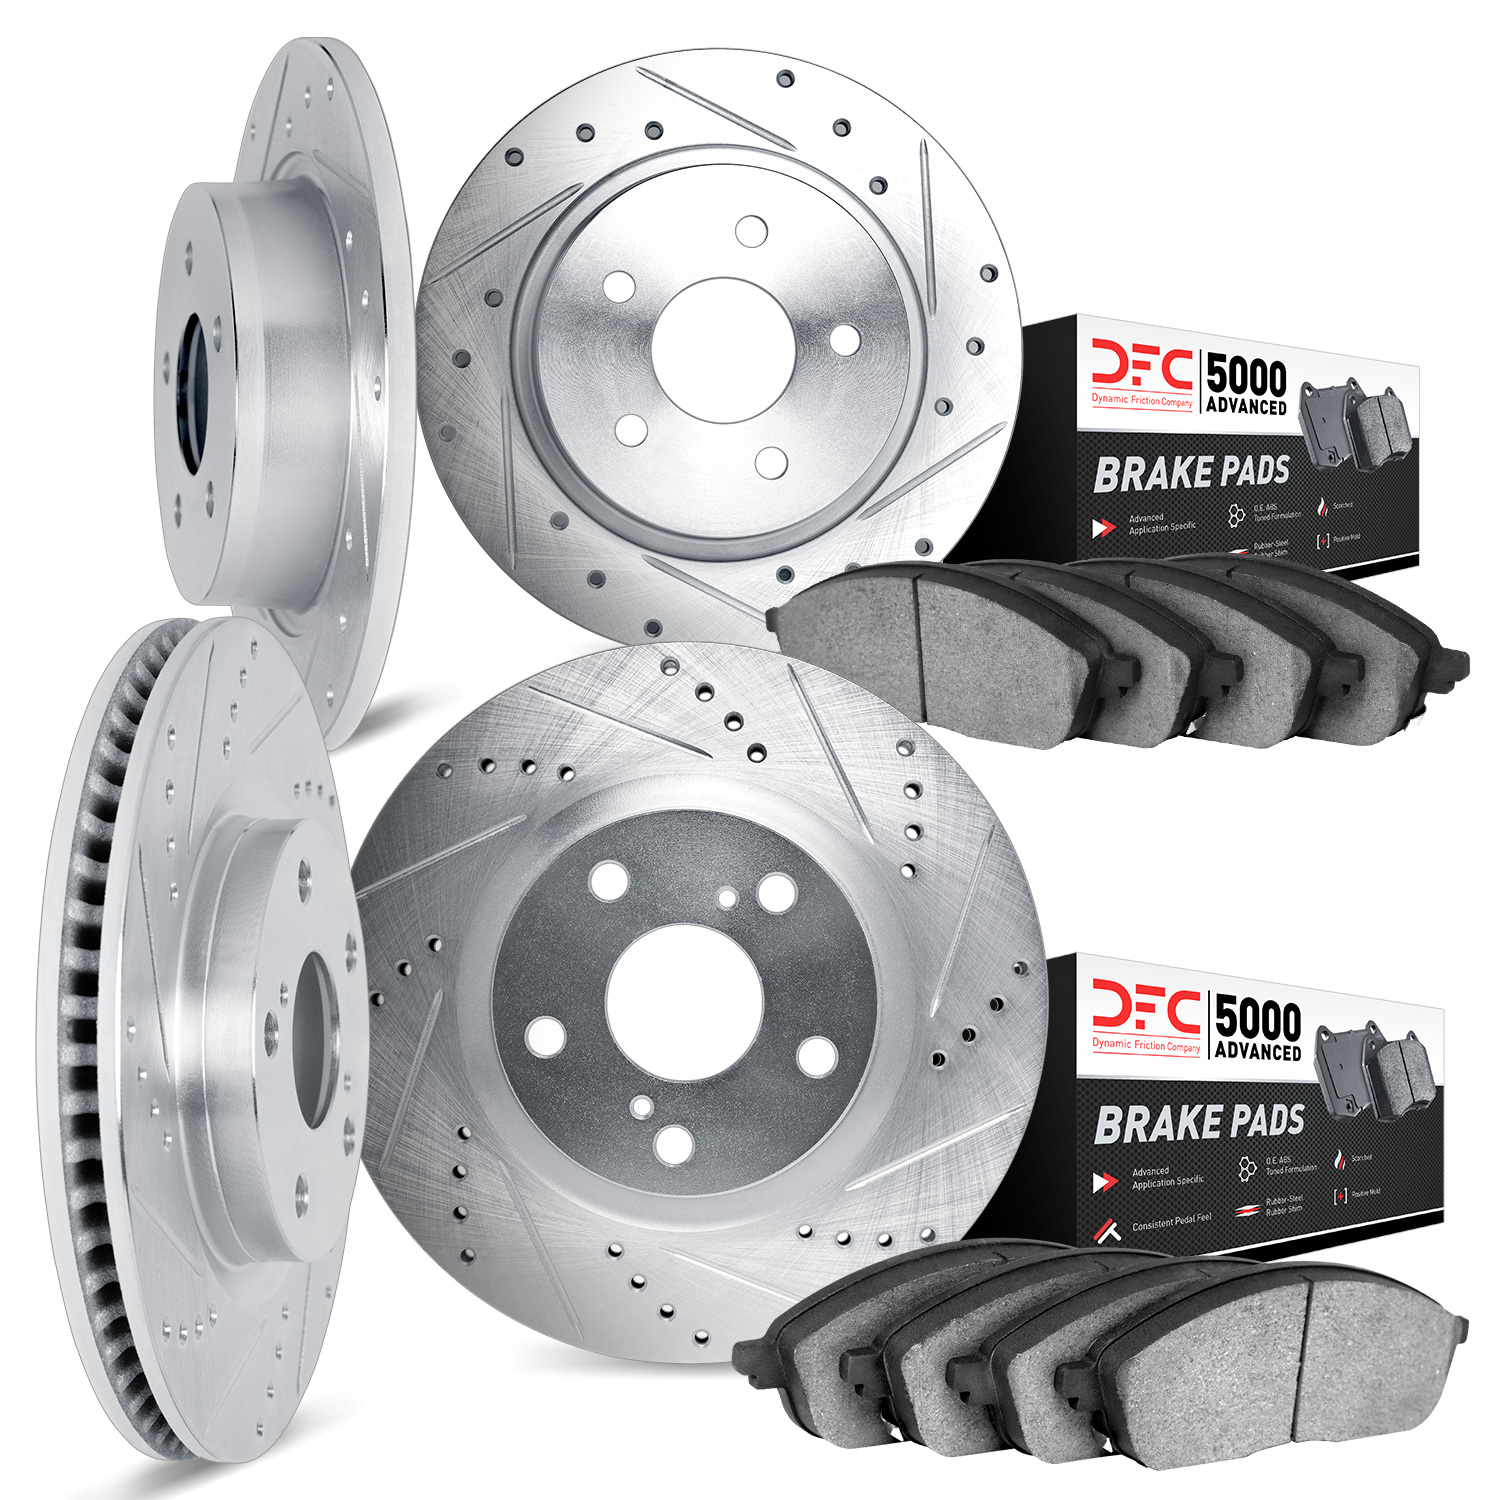 7504-54340 Drilled/Slotted Brake Rotors w/5000 Advanced Brake Pads Kit [Silver], 2000-2004 Ford/Lincoln/Mercury/Mazda, Position: